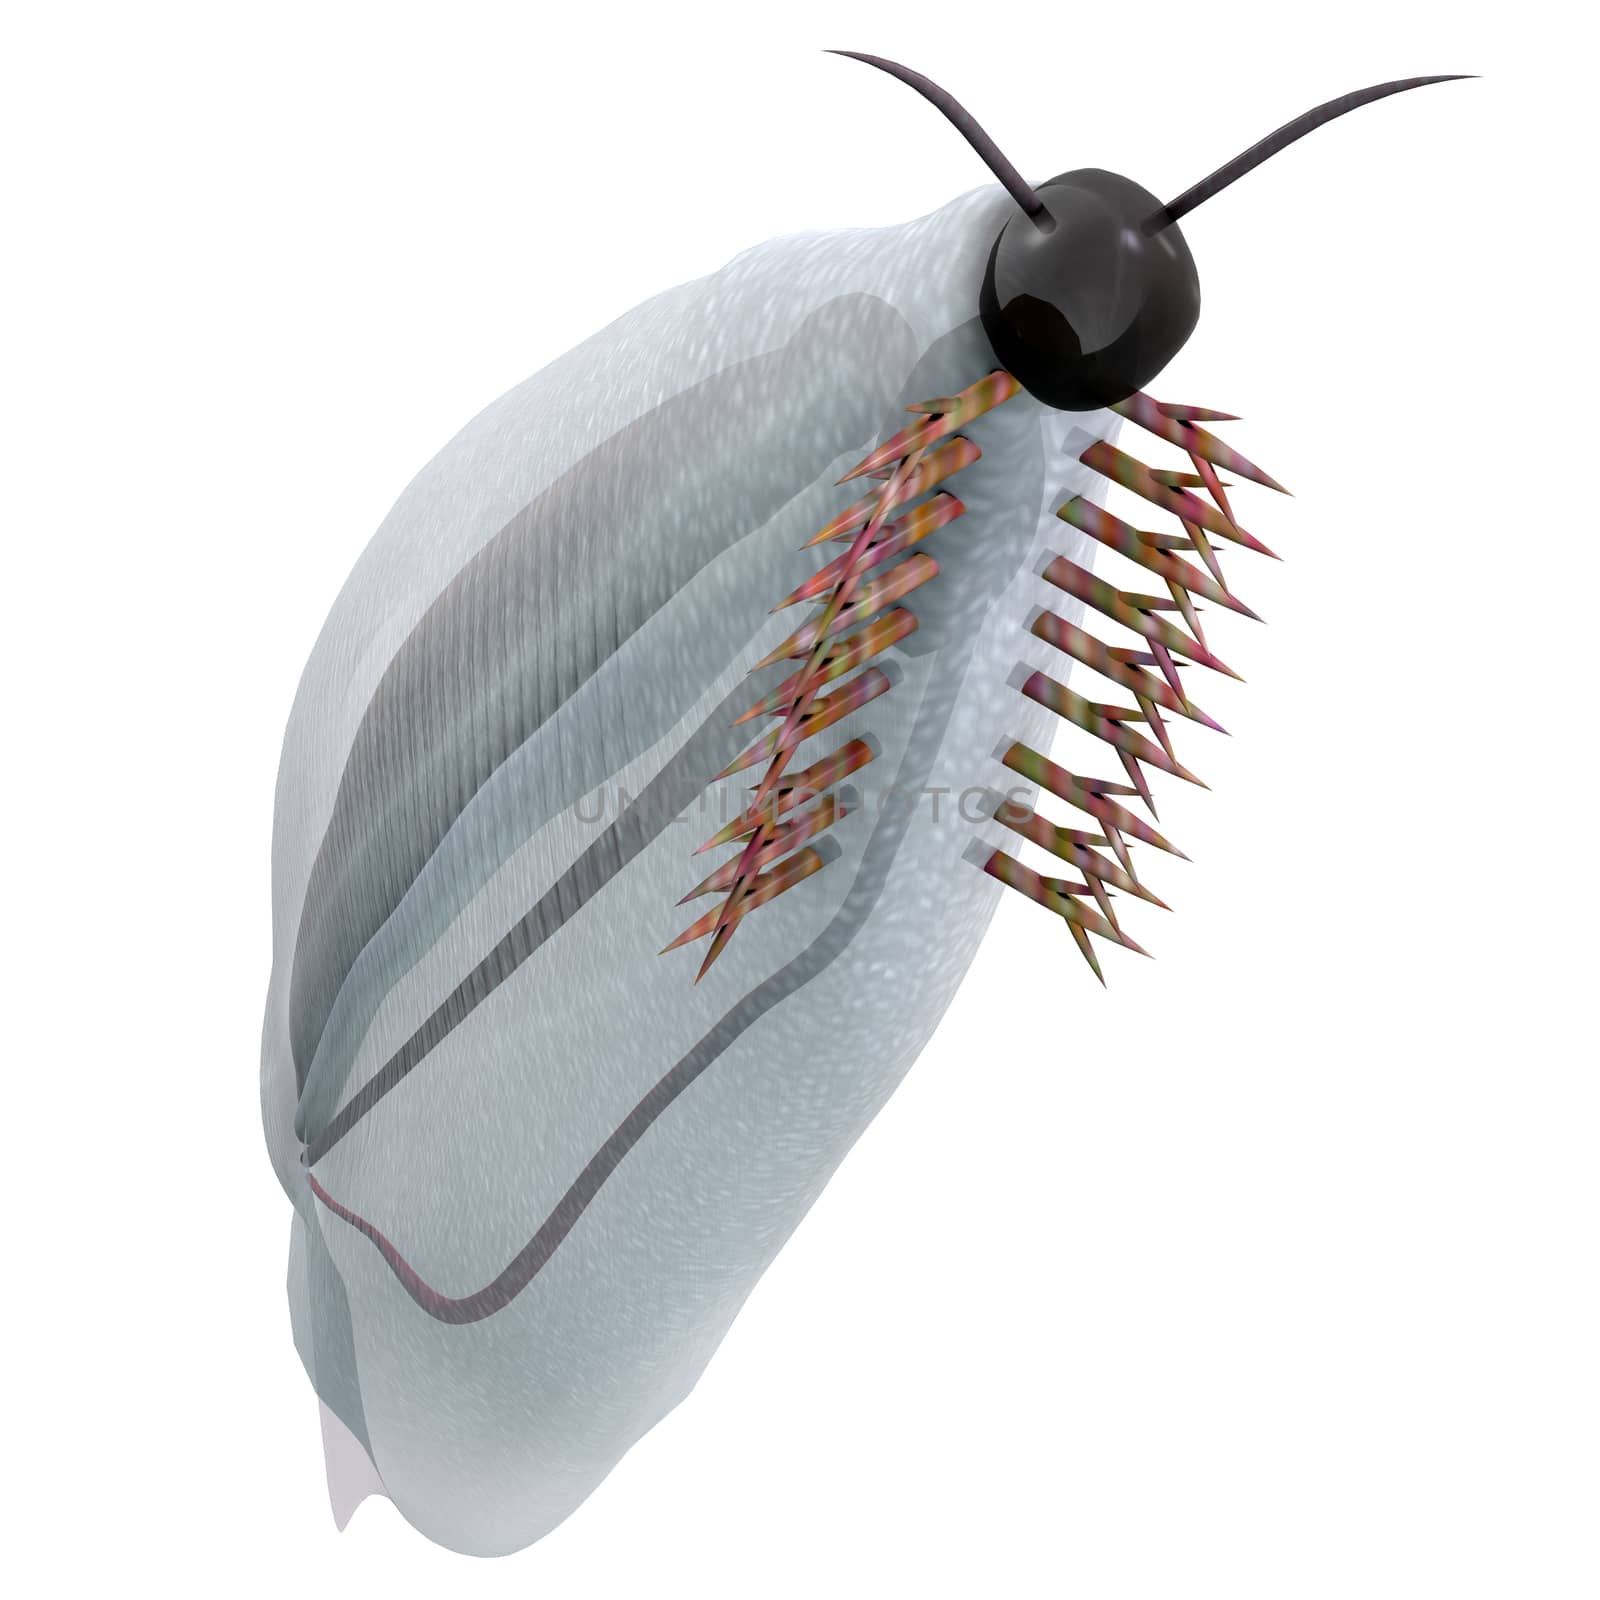 Pikaia is an extinct Burgess shale animal that lived in the Cambrian Period of British Columbia, Canada.